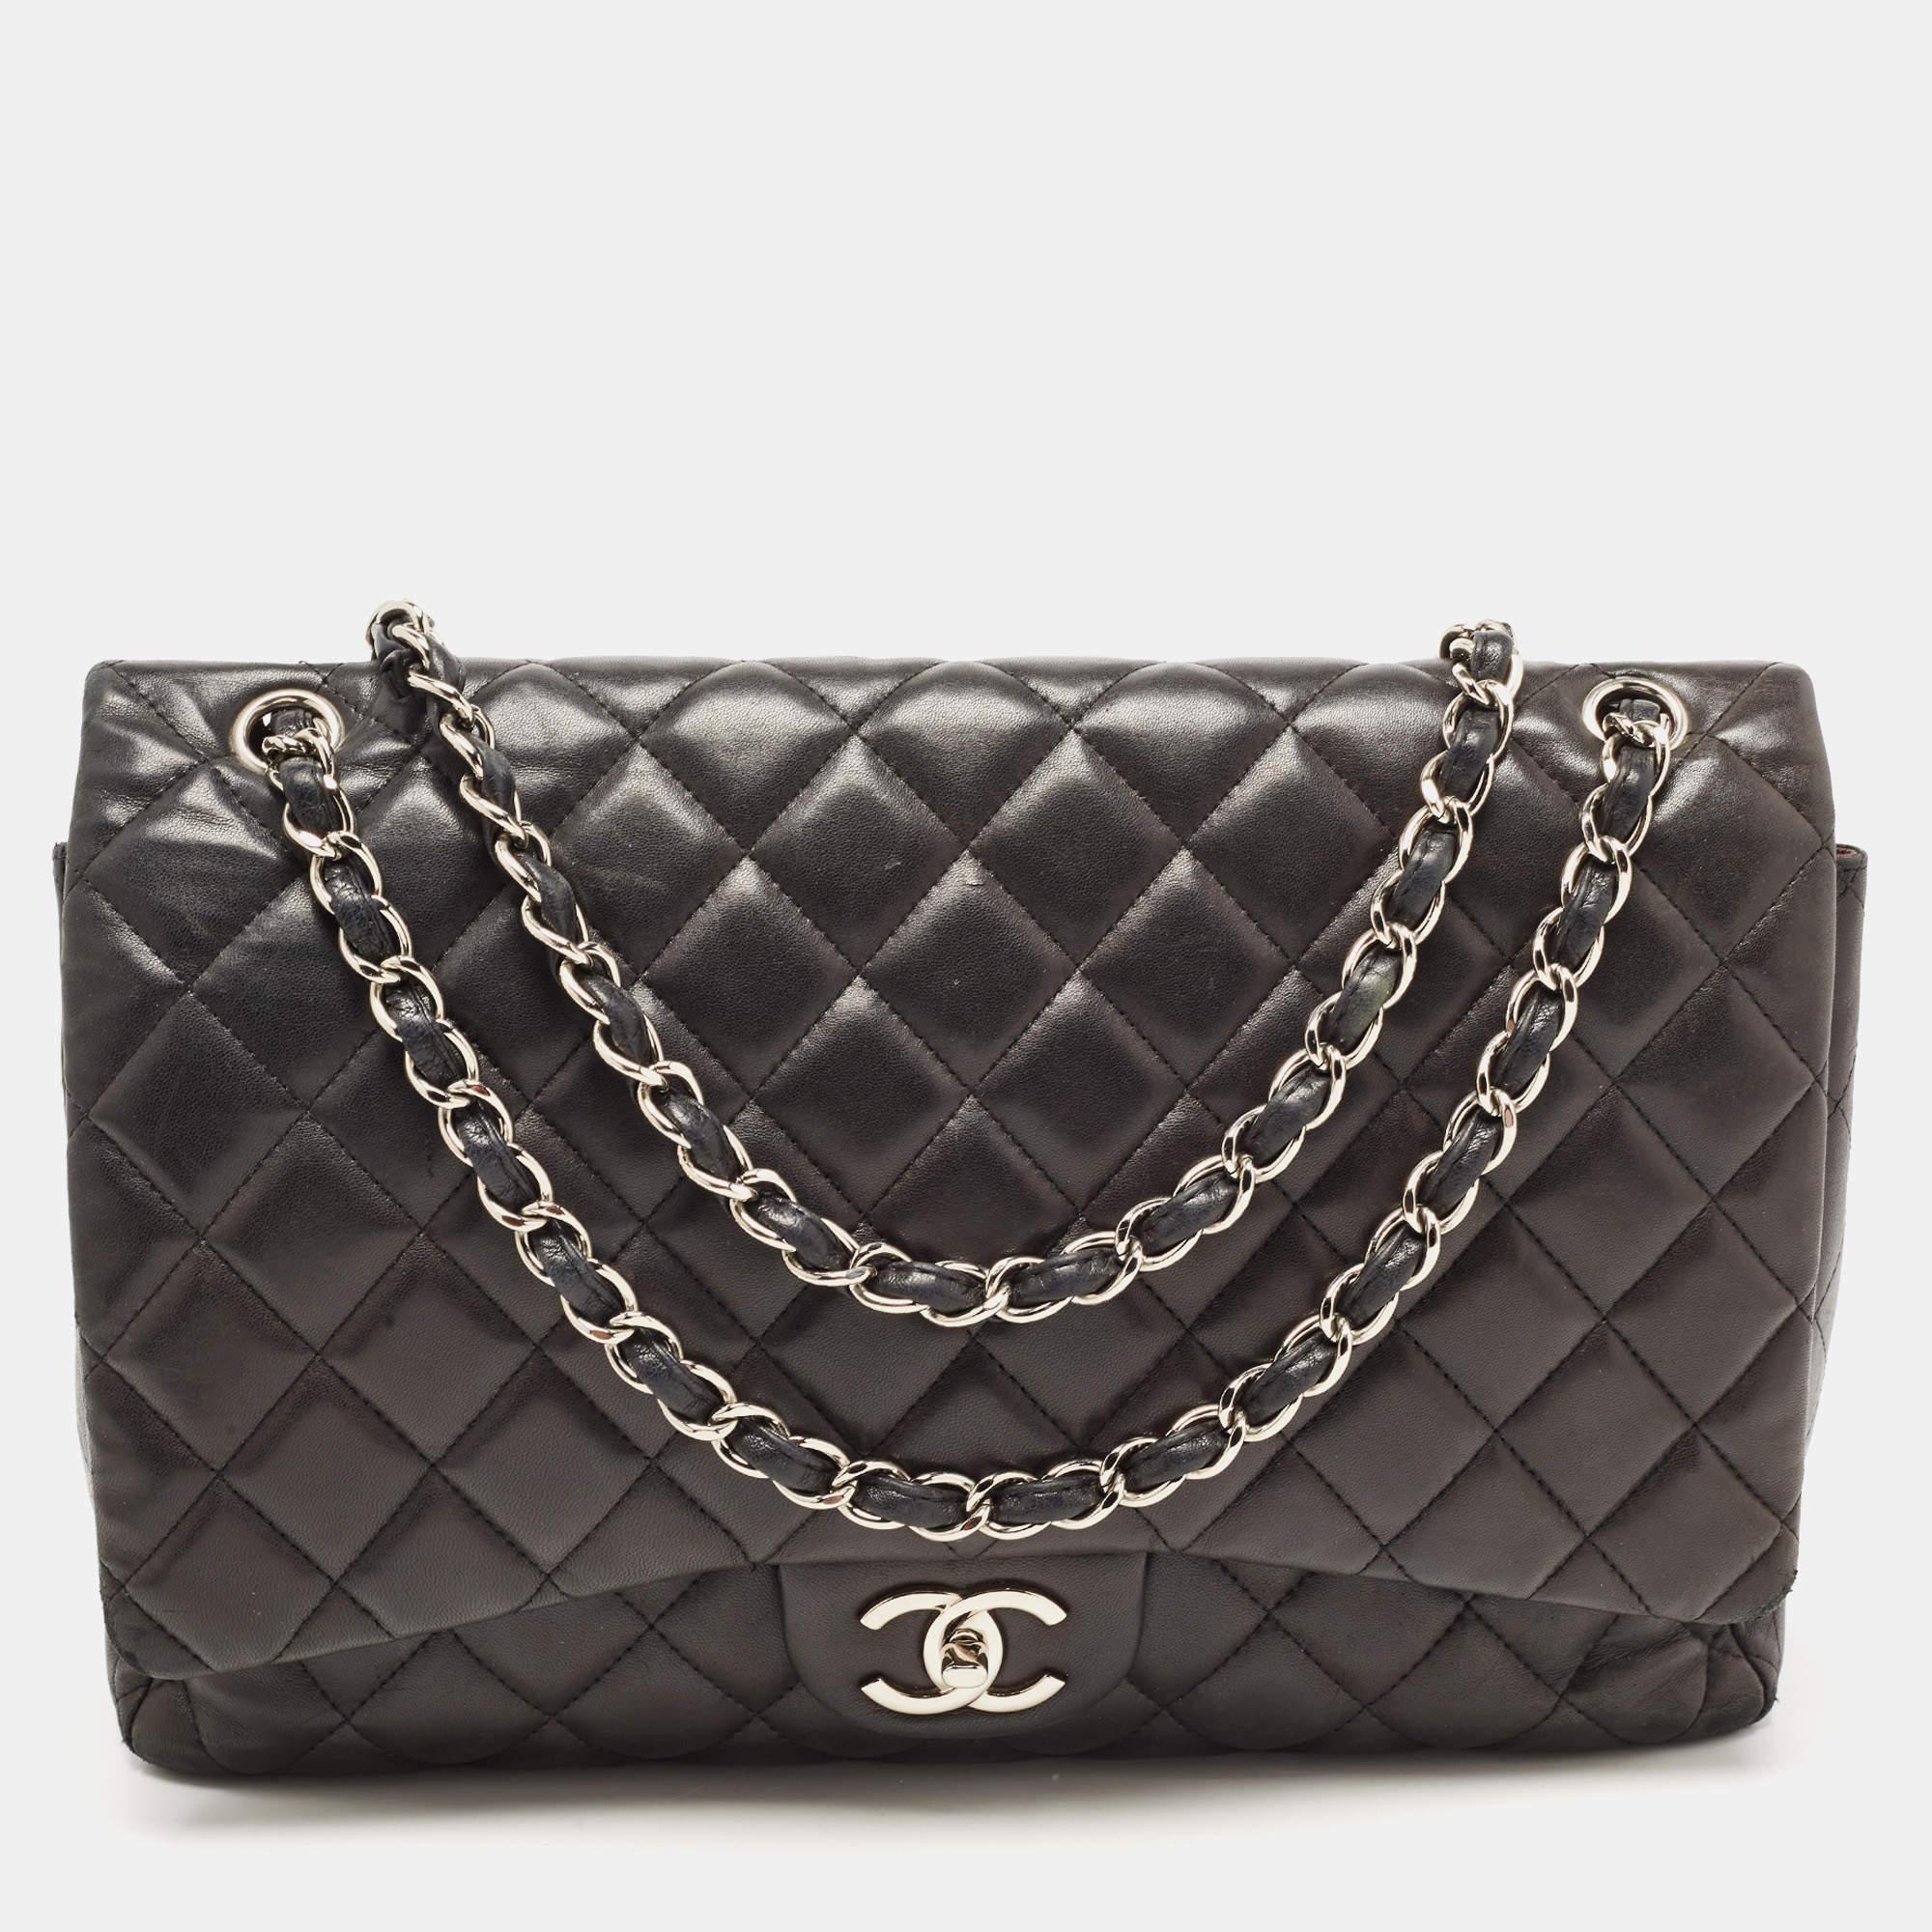 Chanel Black Quilted Leather Maxi Classic Double Flap Bag For Sale 3